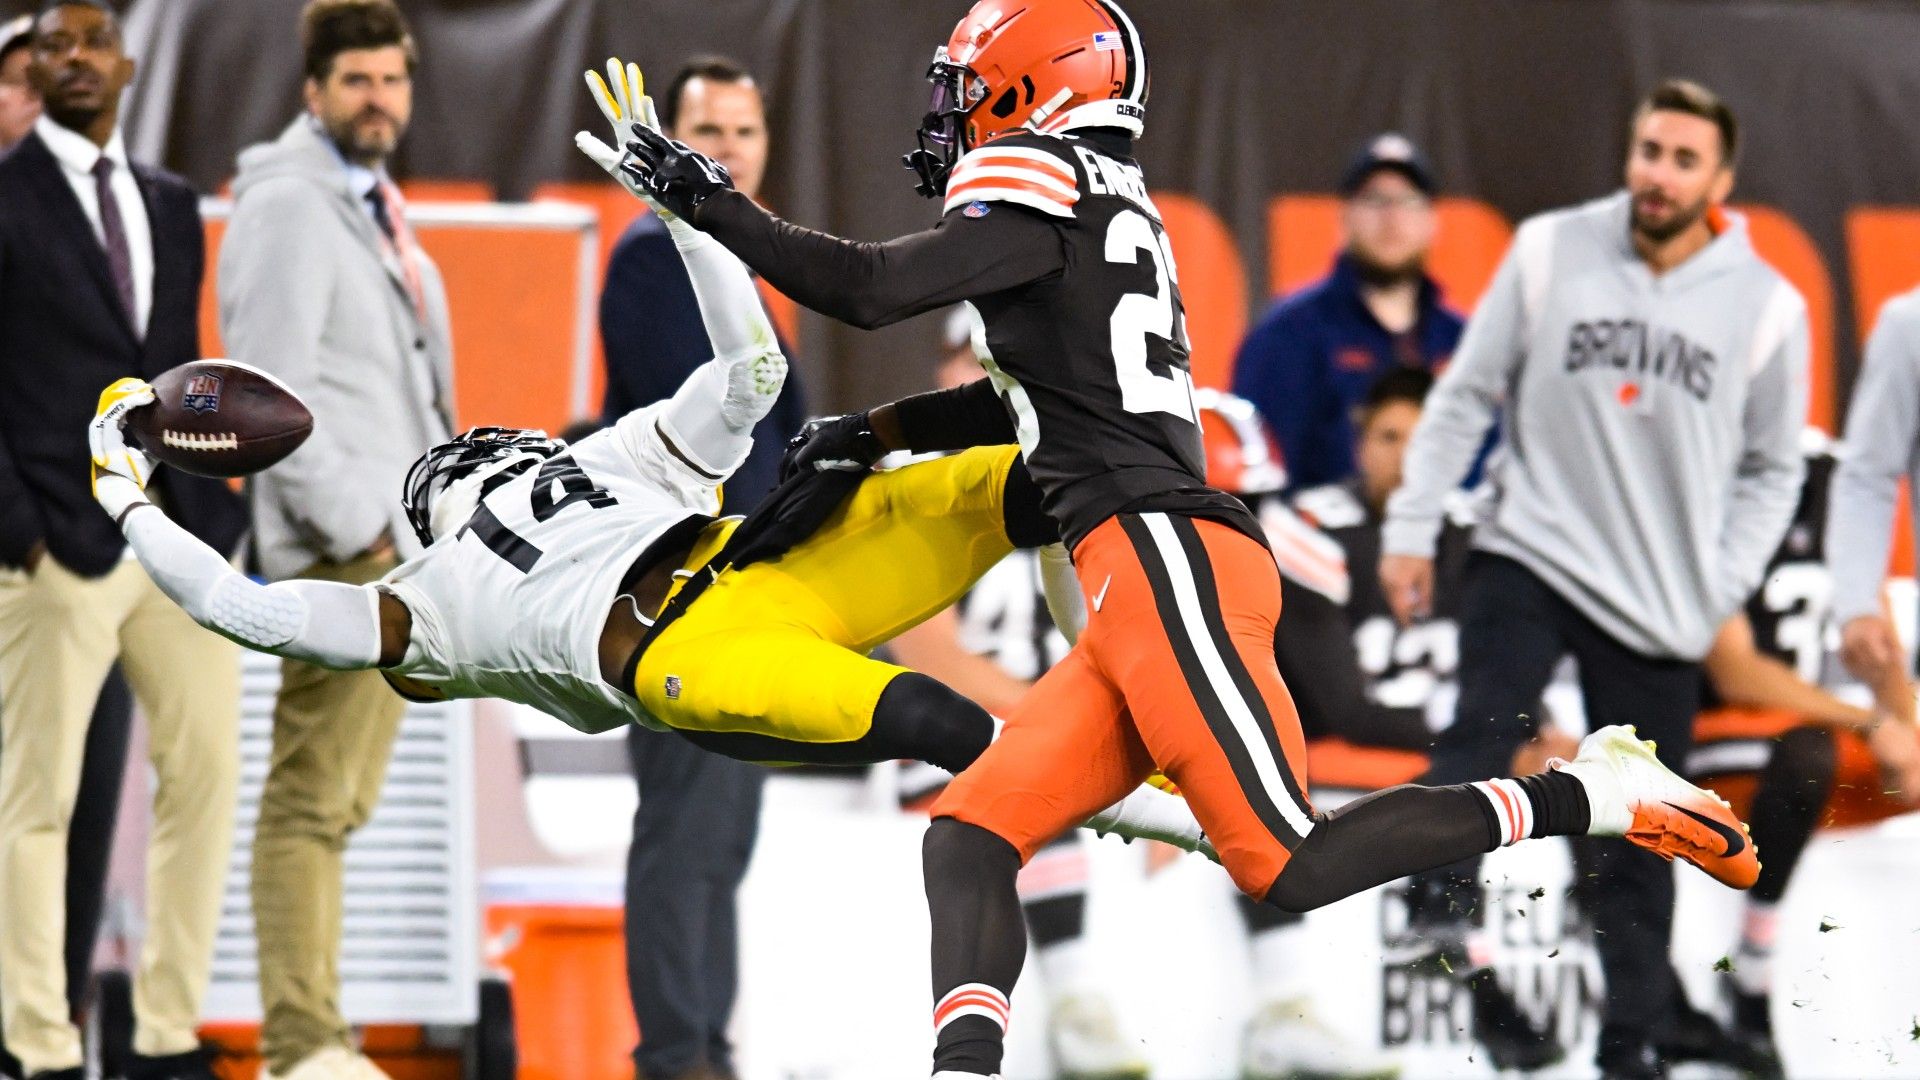 George Pickens takes 'catch of the year' but Browns get big win over Steelers